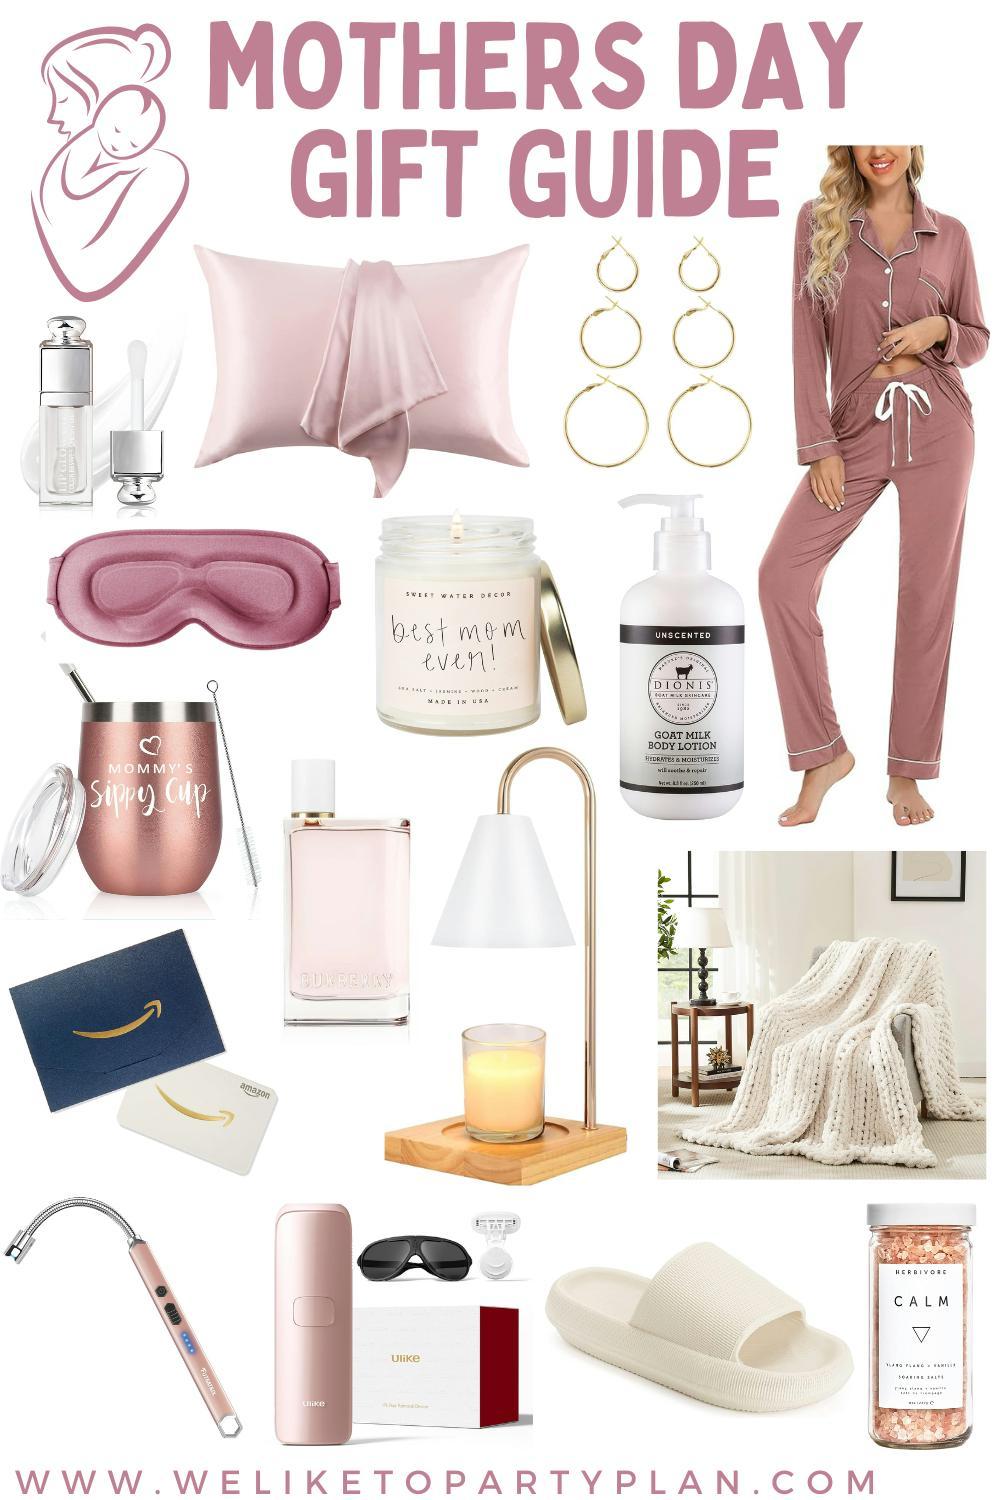 Mother's Day Gift Guide - We Like To Party Plan